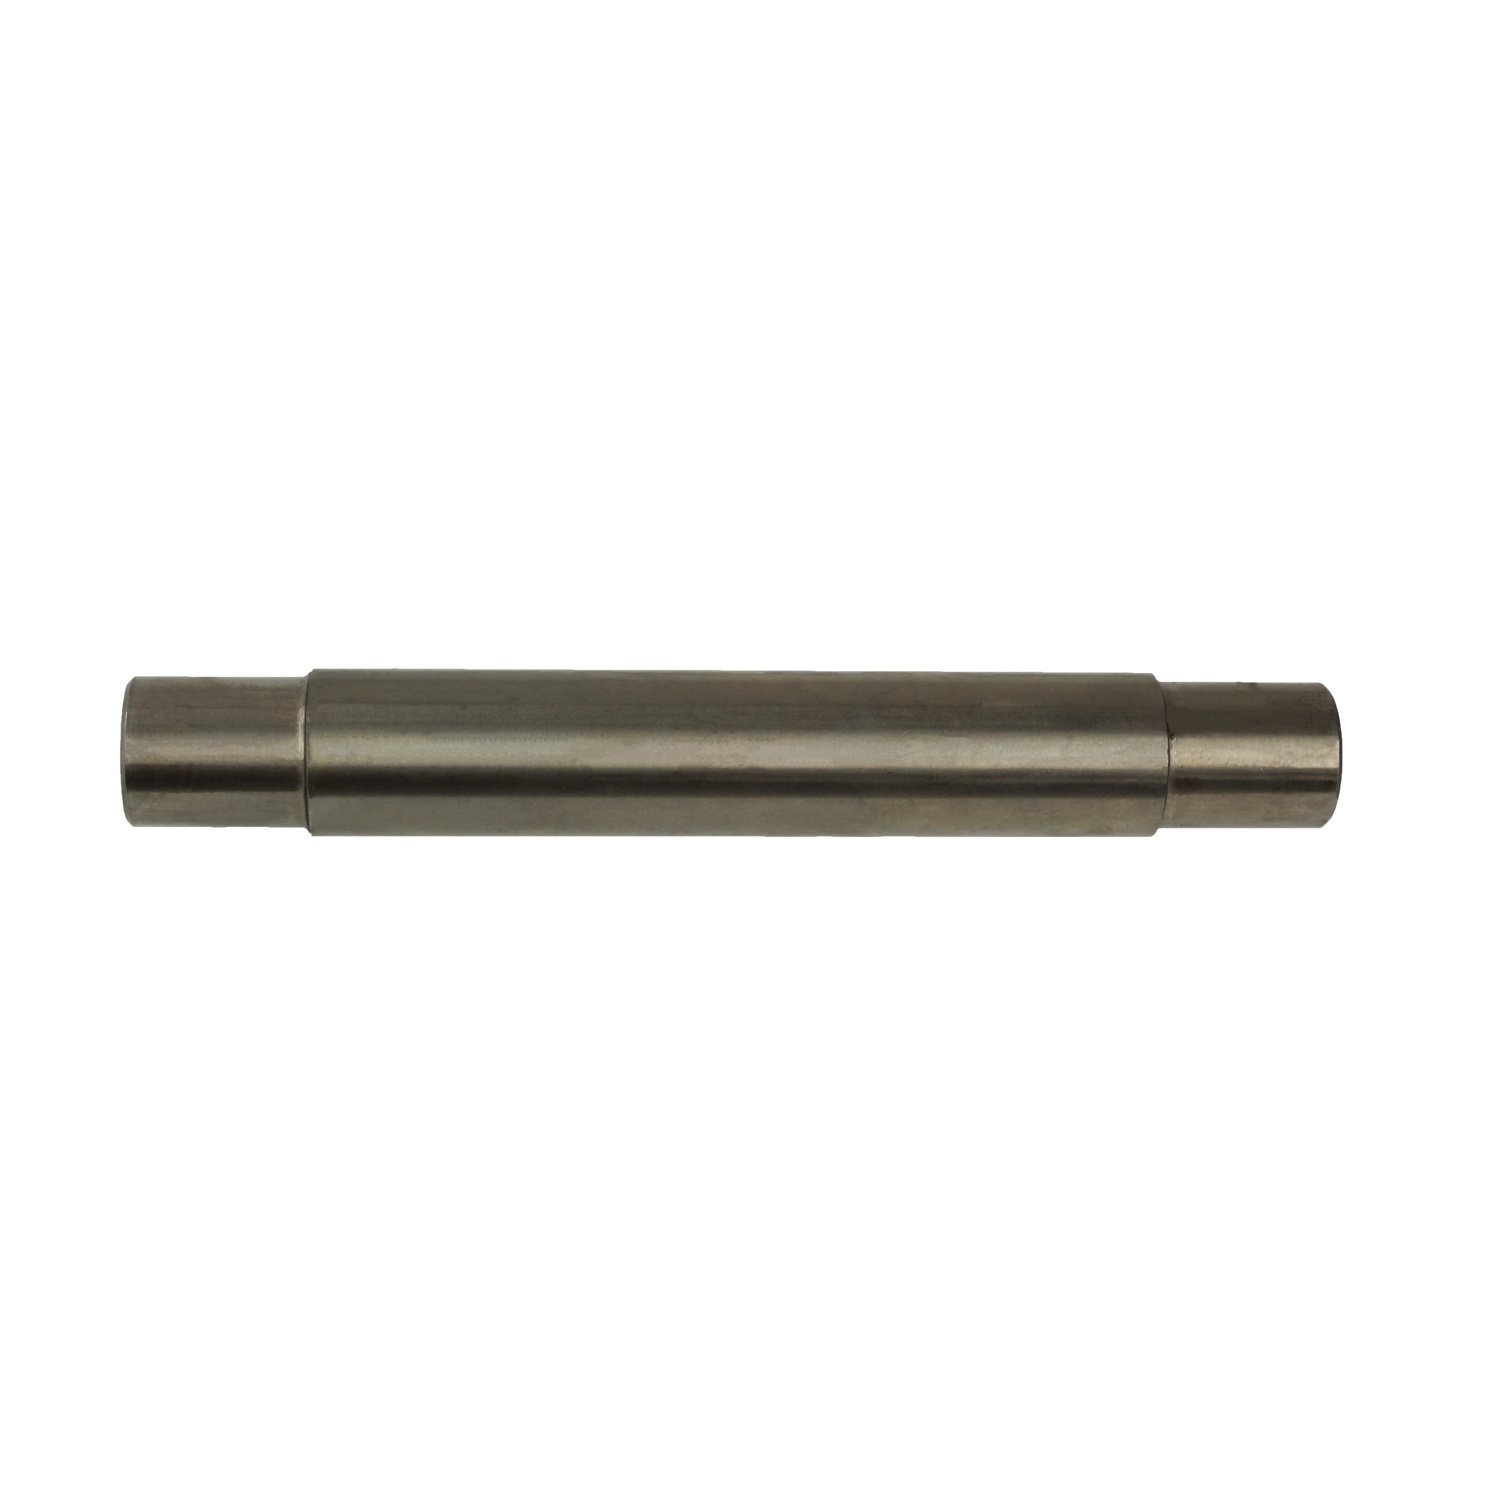 DIFFERENTIAL PINION SHAFT